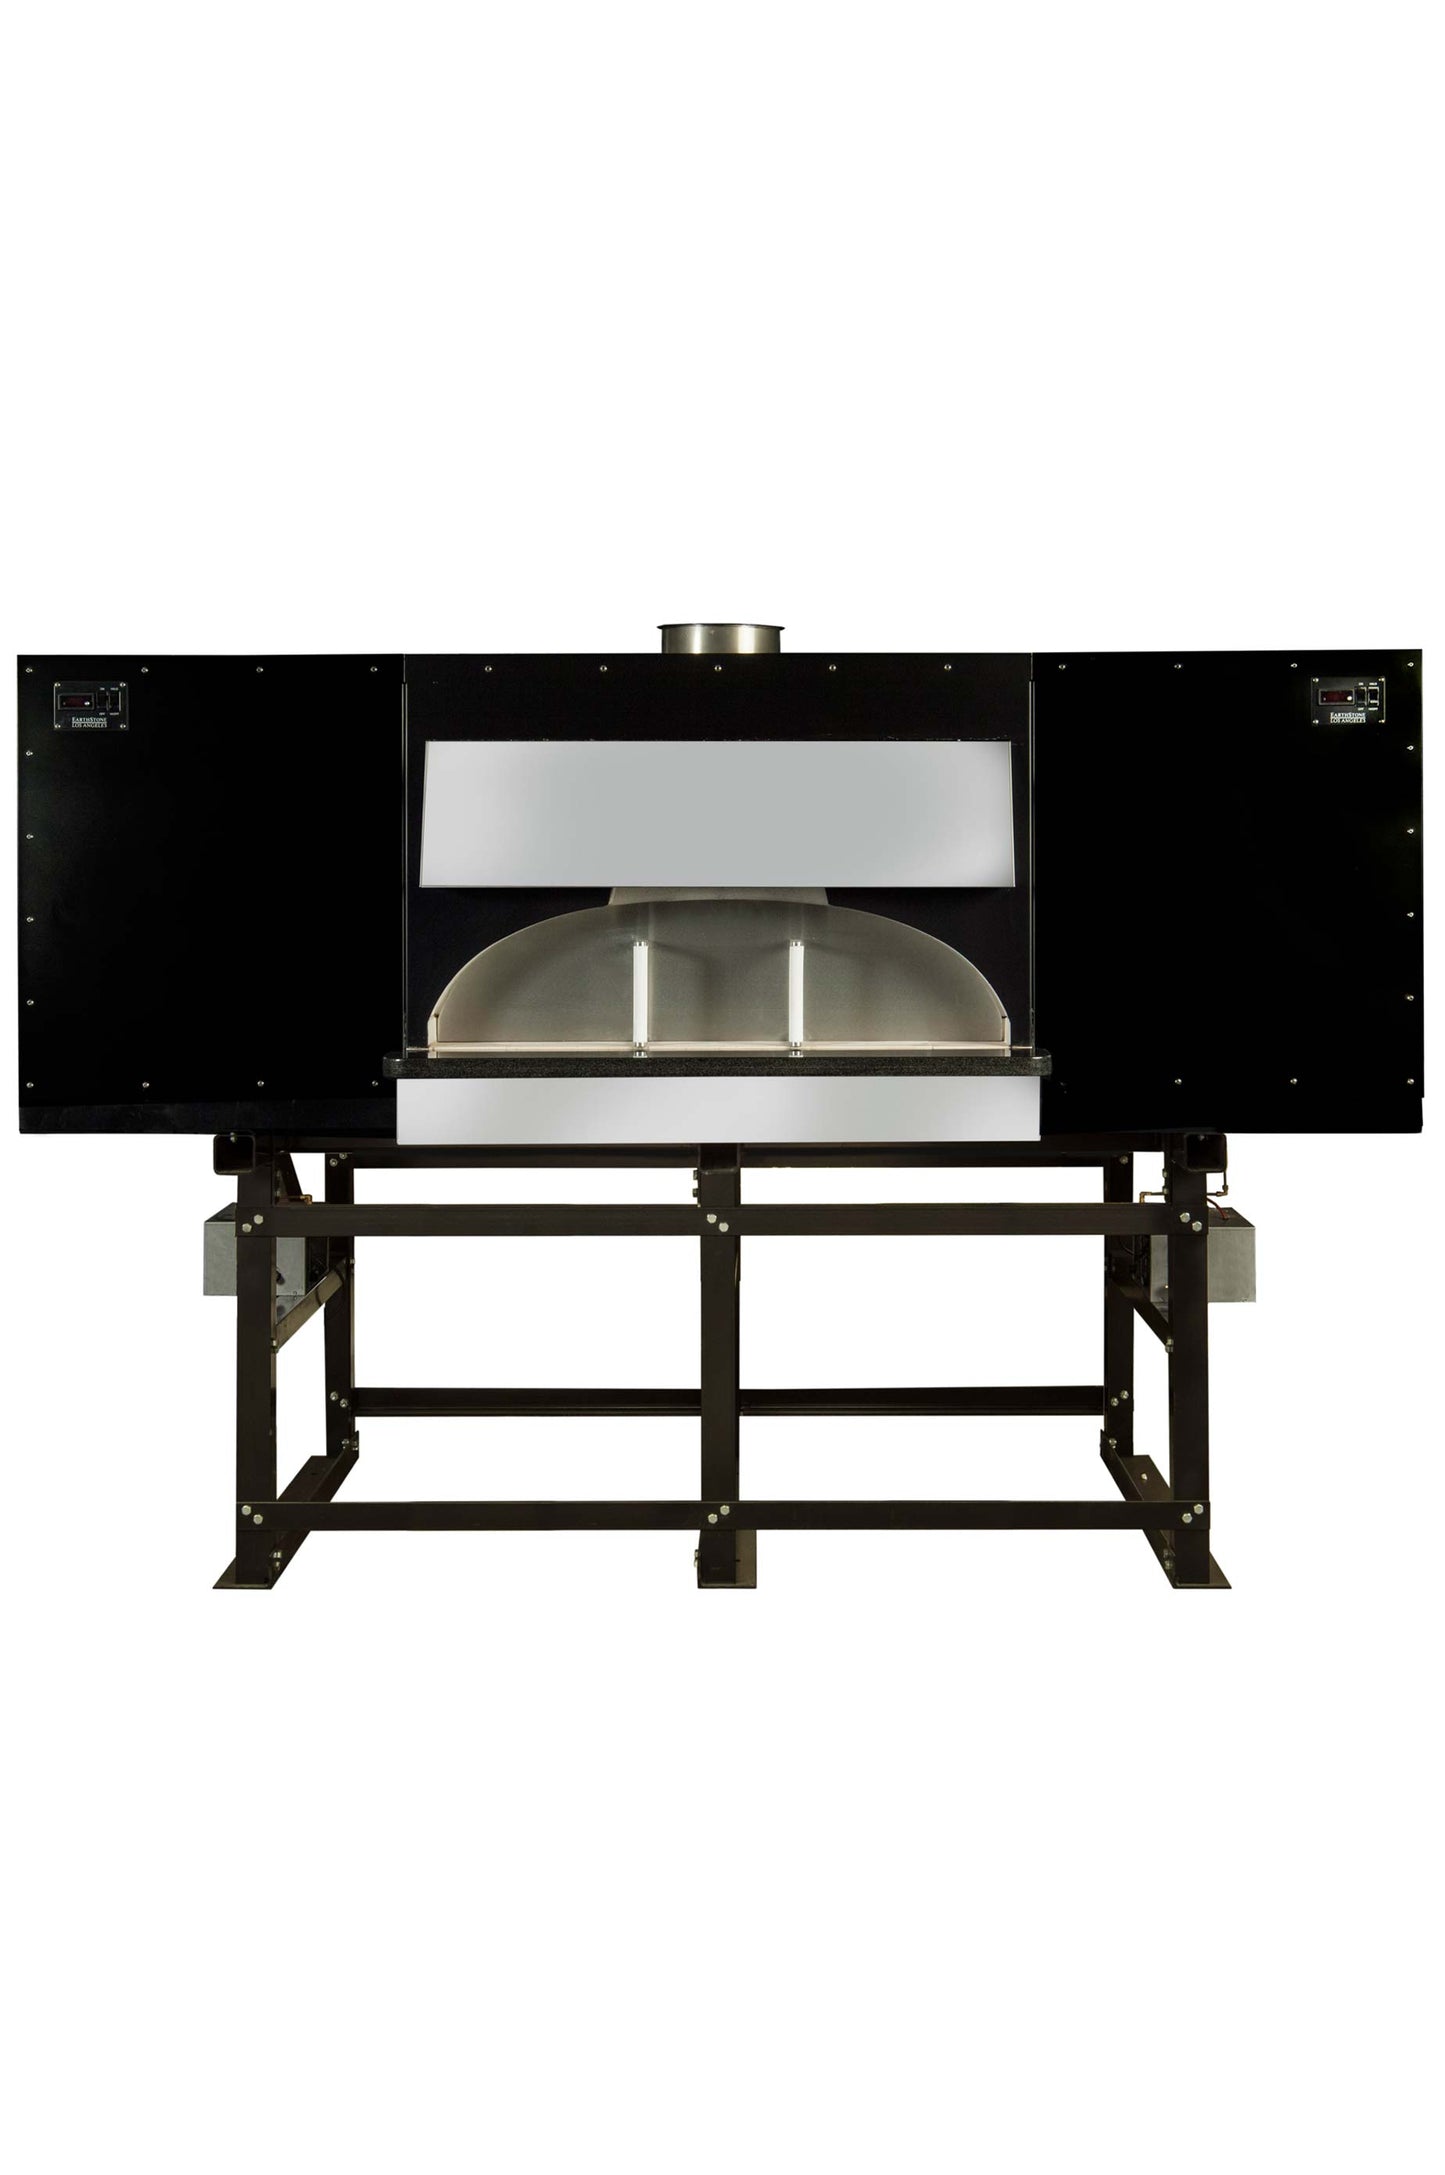 Earthstone 130-Due-PA Wood Fired Pre-assembled Oven